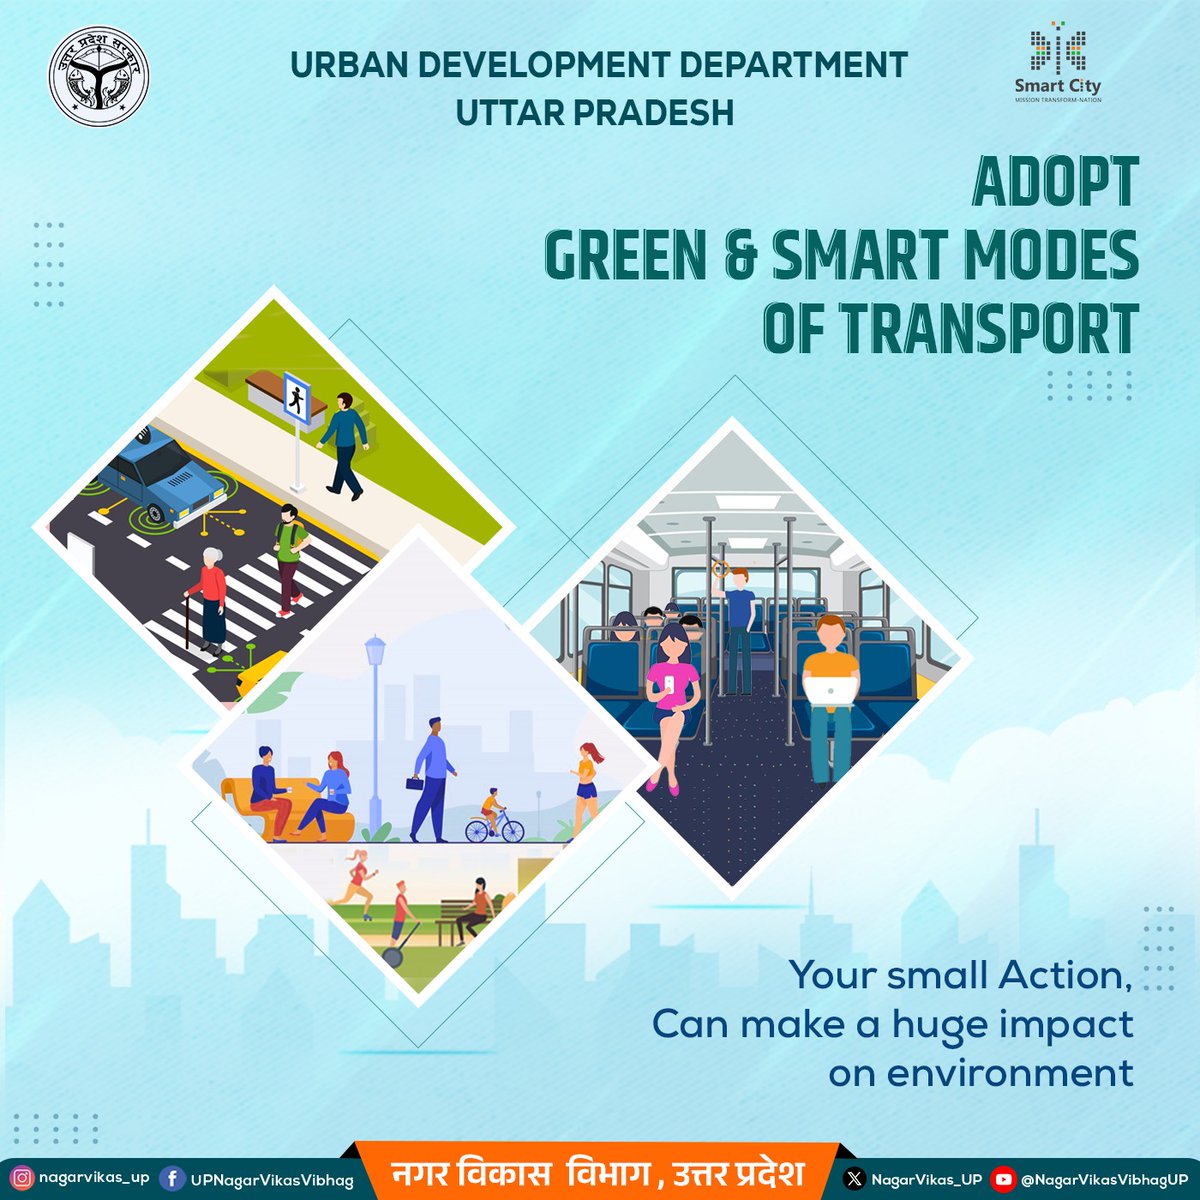 🌿 Switch to Smart Transport! 🚌

Public Transit: Embrace the ease and efficiency of our improved transit systems.

#GreenTransport #SustainableCities #SmartCity #UttarPradesh #UrbanDevelopment